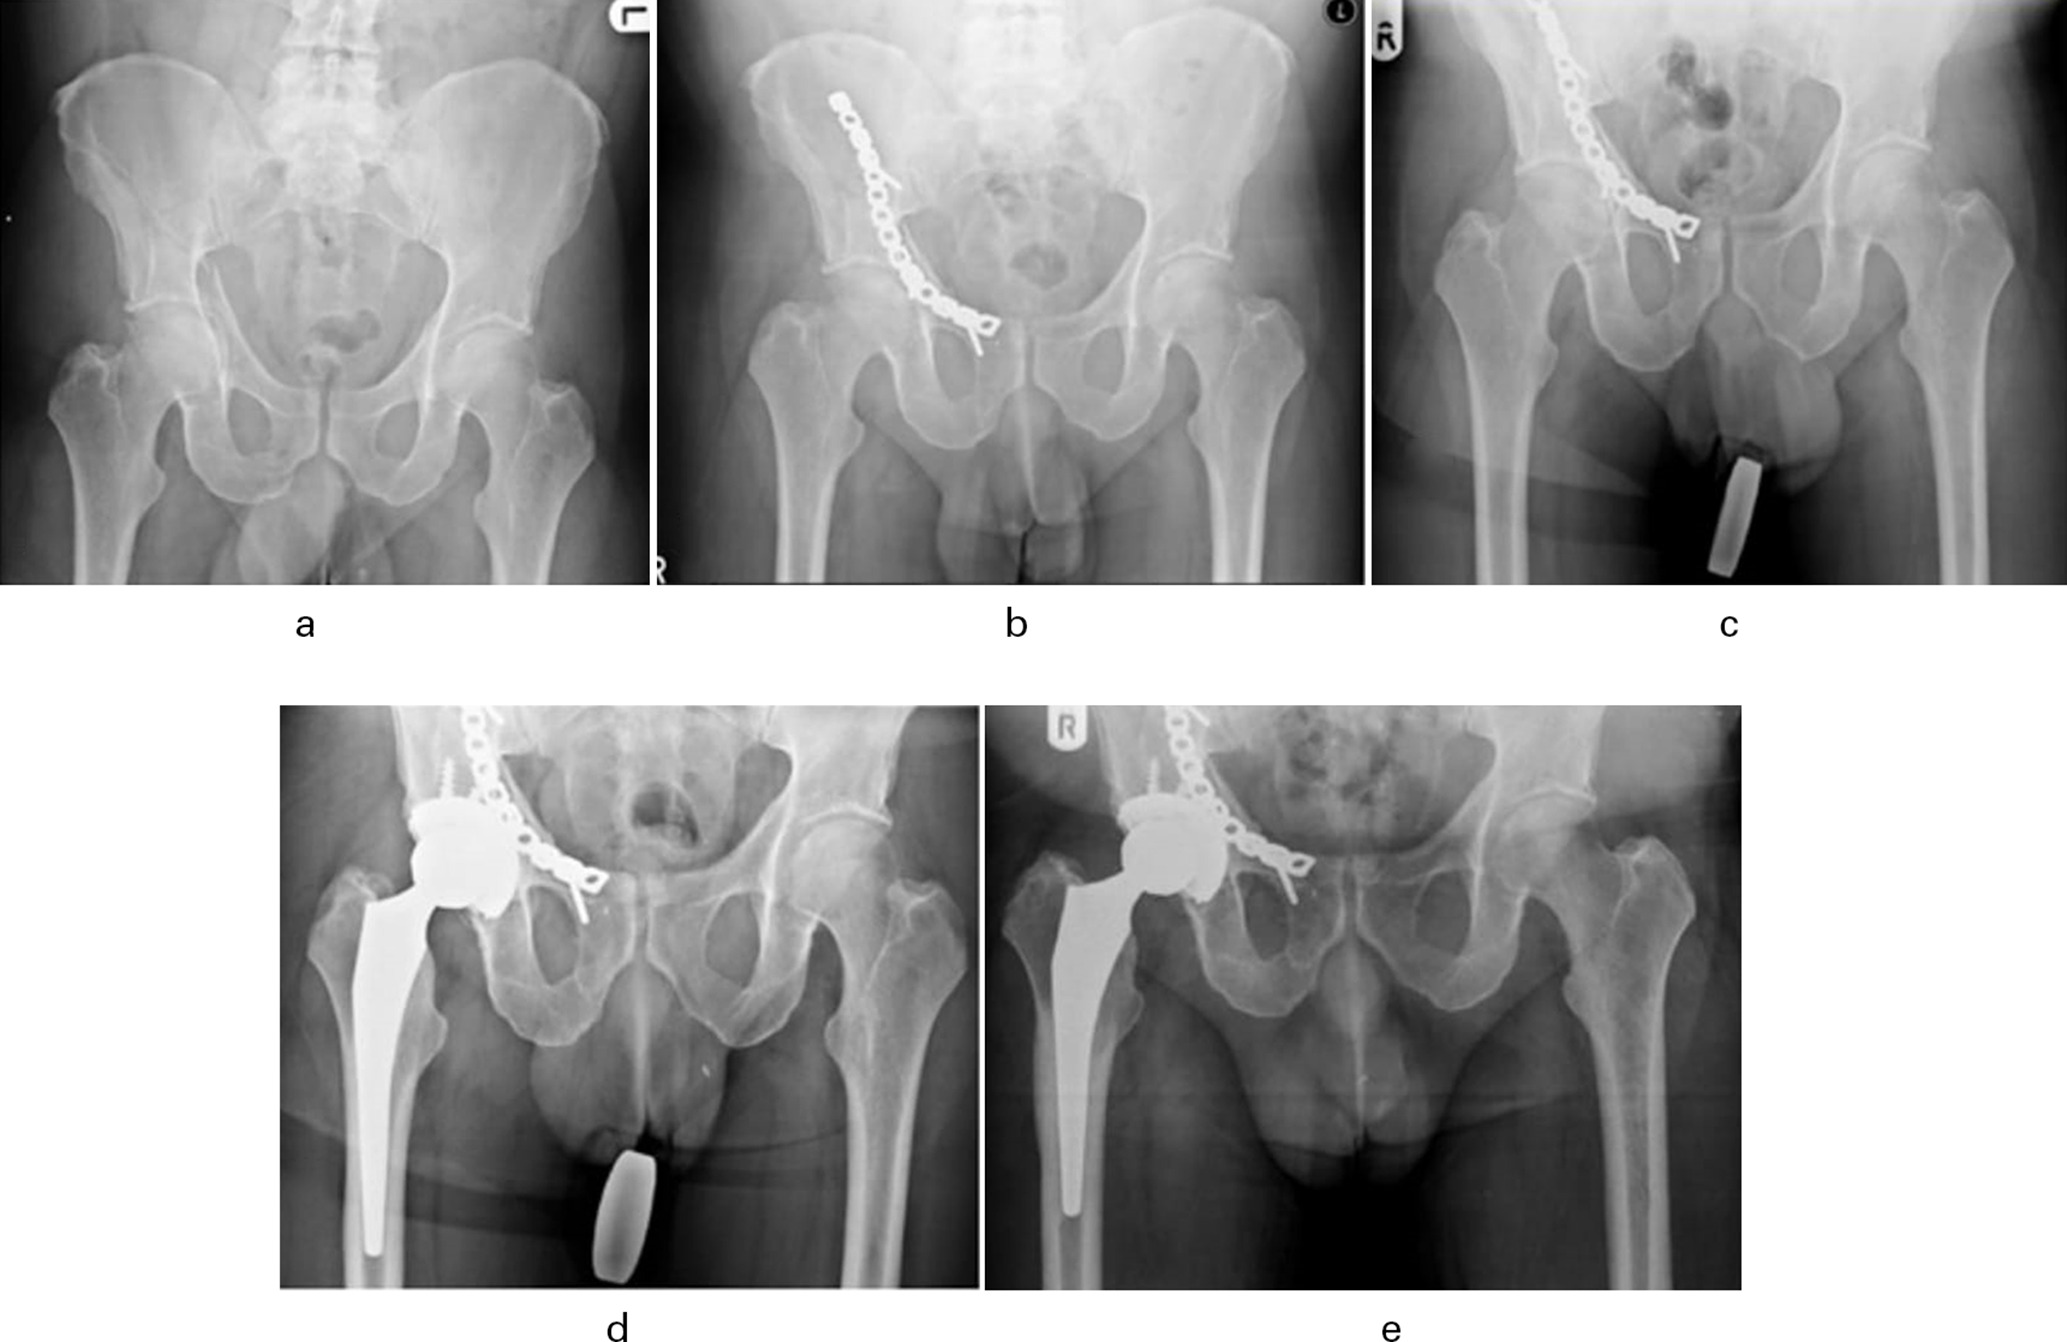 Fig. 4 
            58-year-old male patient who had a delayed right-sided uncemented total hip arthroplasty (THA). a) Initial injury anteroposterior (AP) radiograph showing right acetabular fracture. b) Initial AP radiograph post-open reduction and internal fixation of the right acetabular fracture. c) Preoperative AP radiograph showing osteoarthritis of the right hip. d) Immediate AP radiograph post-THA. e) A seven-year follow-up AP radiograph showed no loosening or osteolysis around the acetabular or femoral component.
          